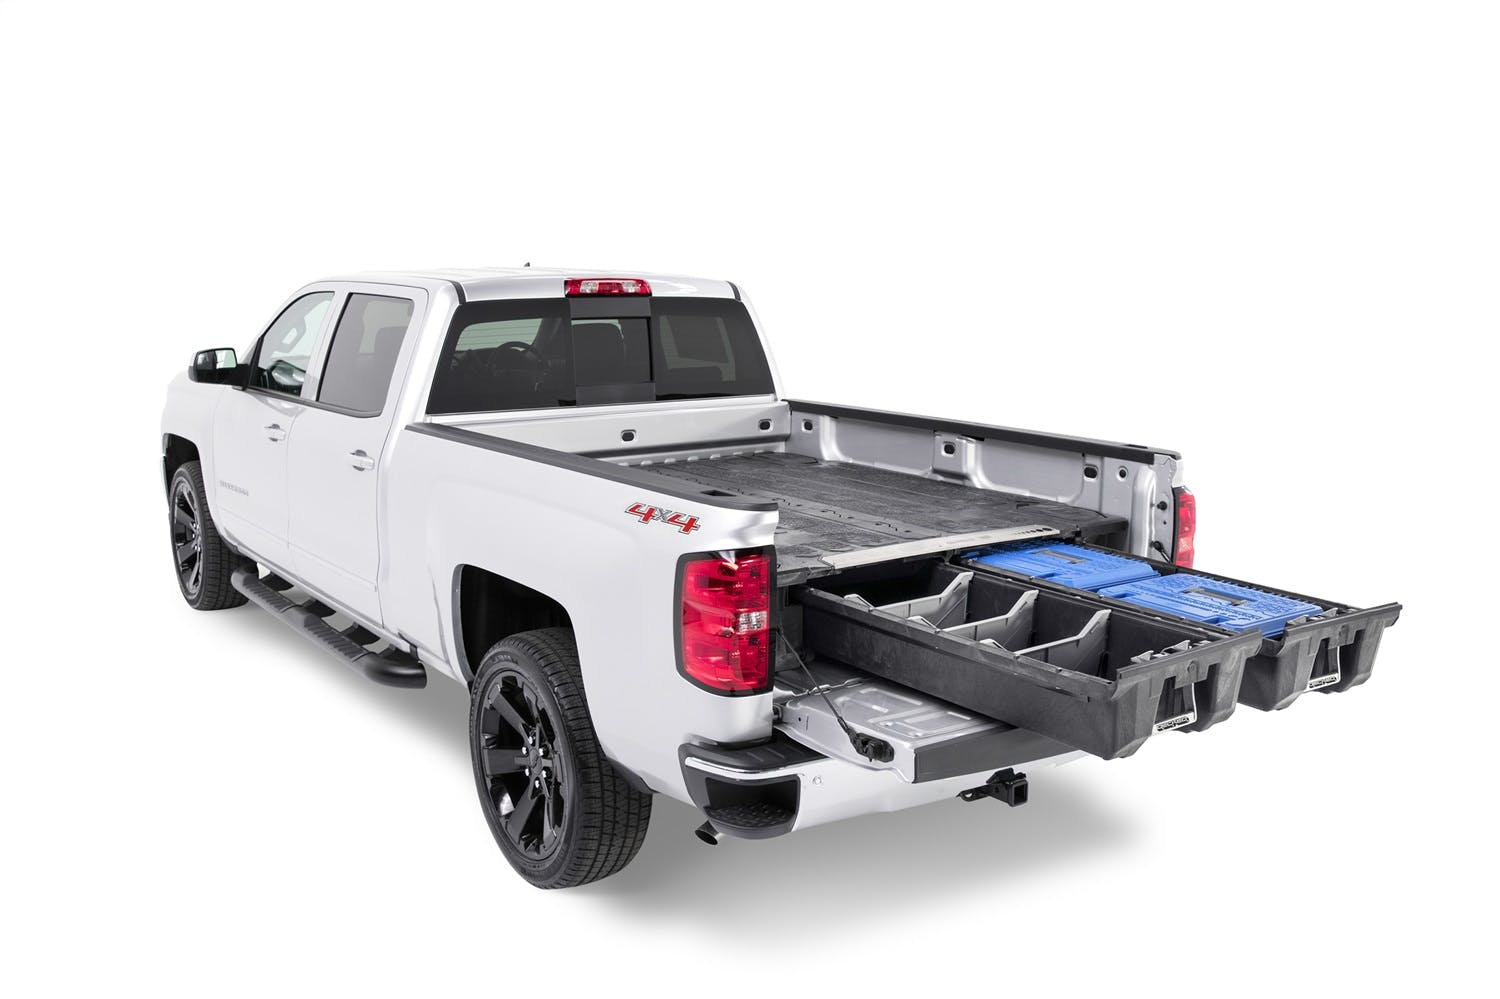 DECKED DG1 64.54 Two Drawer Storage System for A Full Size Pick Up Truck